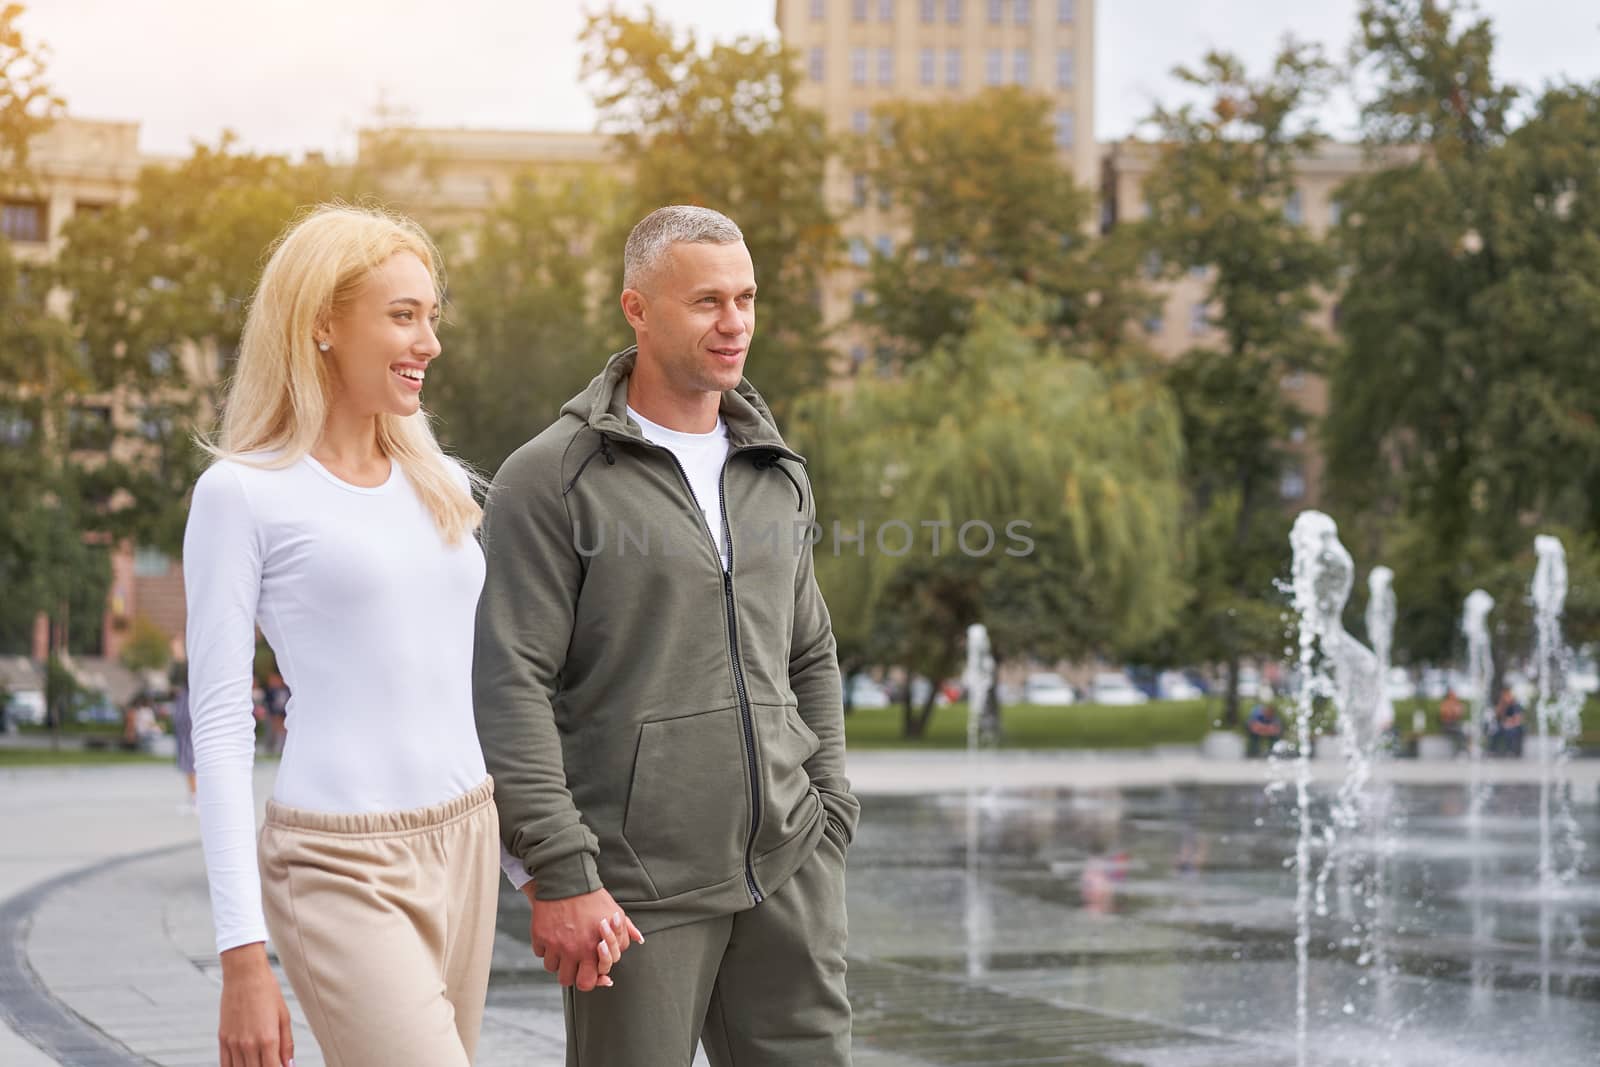 Couple in love walking outdoors park fountain Caucasian man woman walk outside after jogging dressed sport clothes Healthy livestyle Hold hands each other